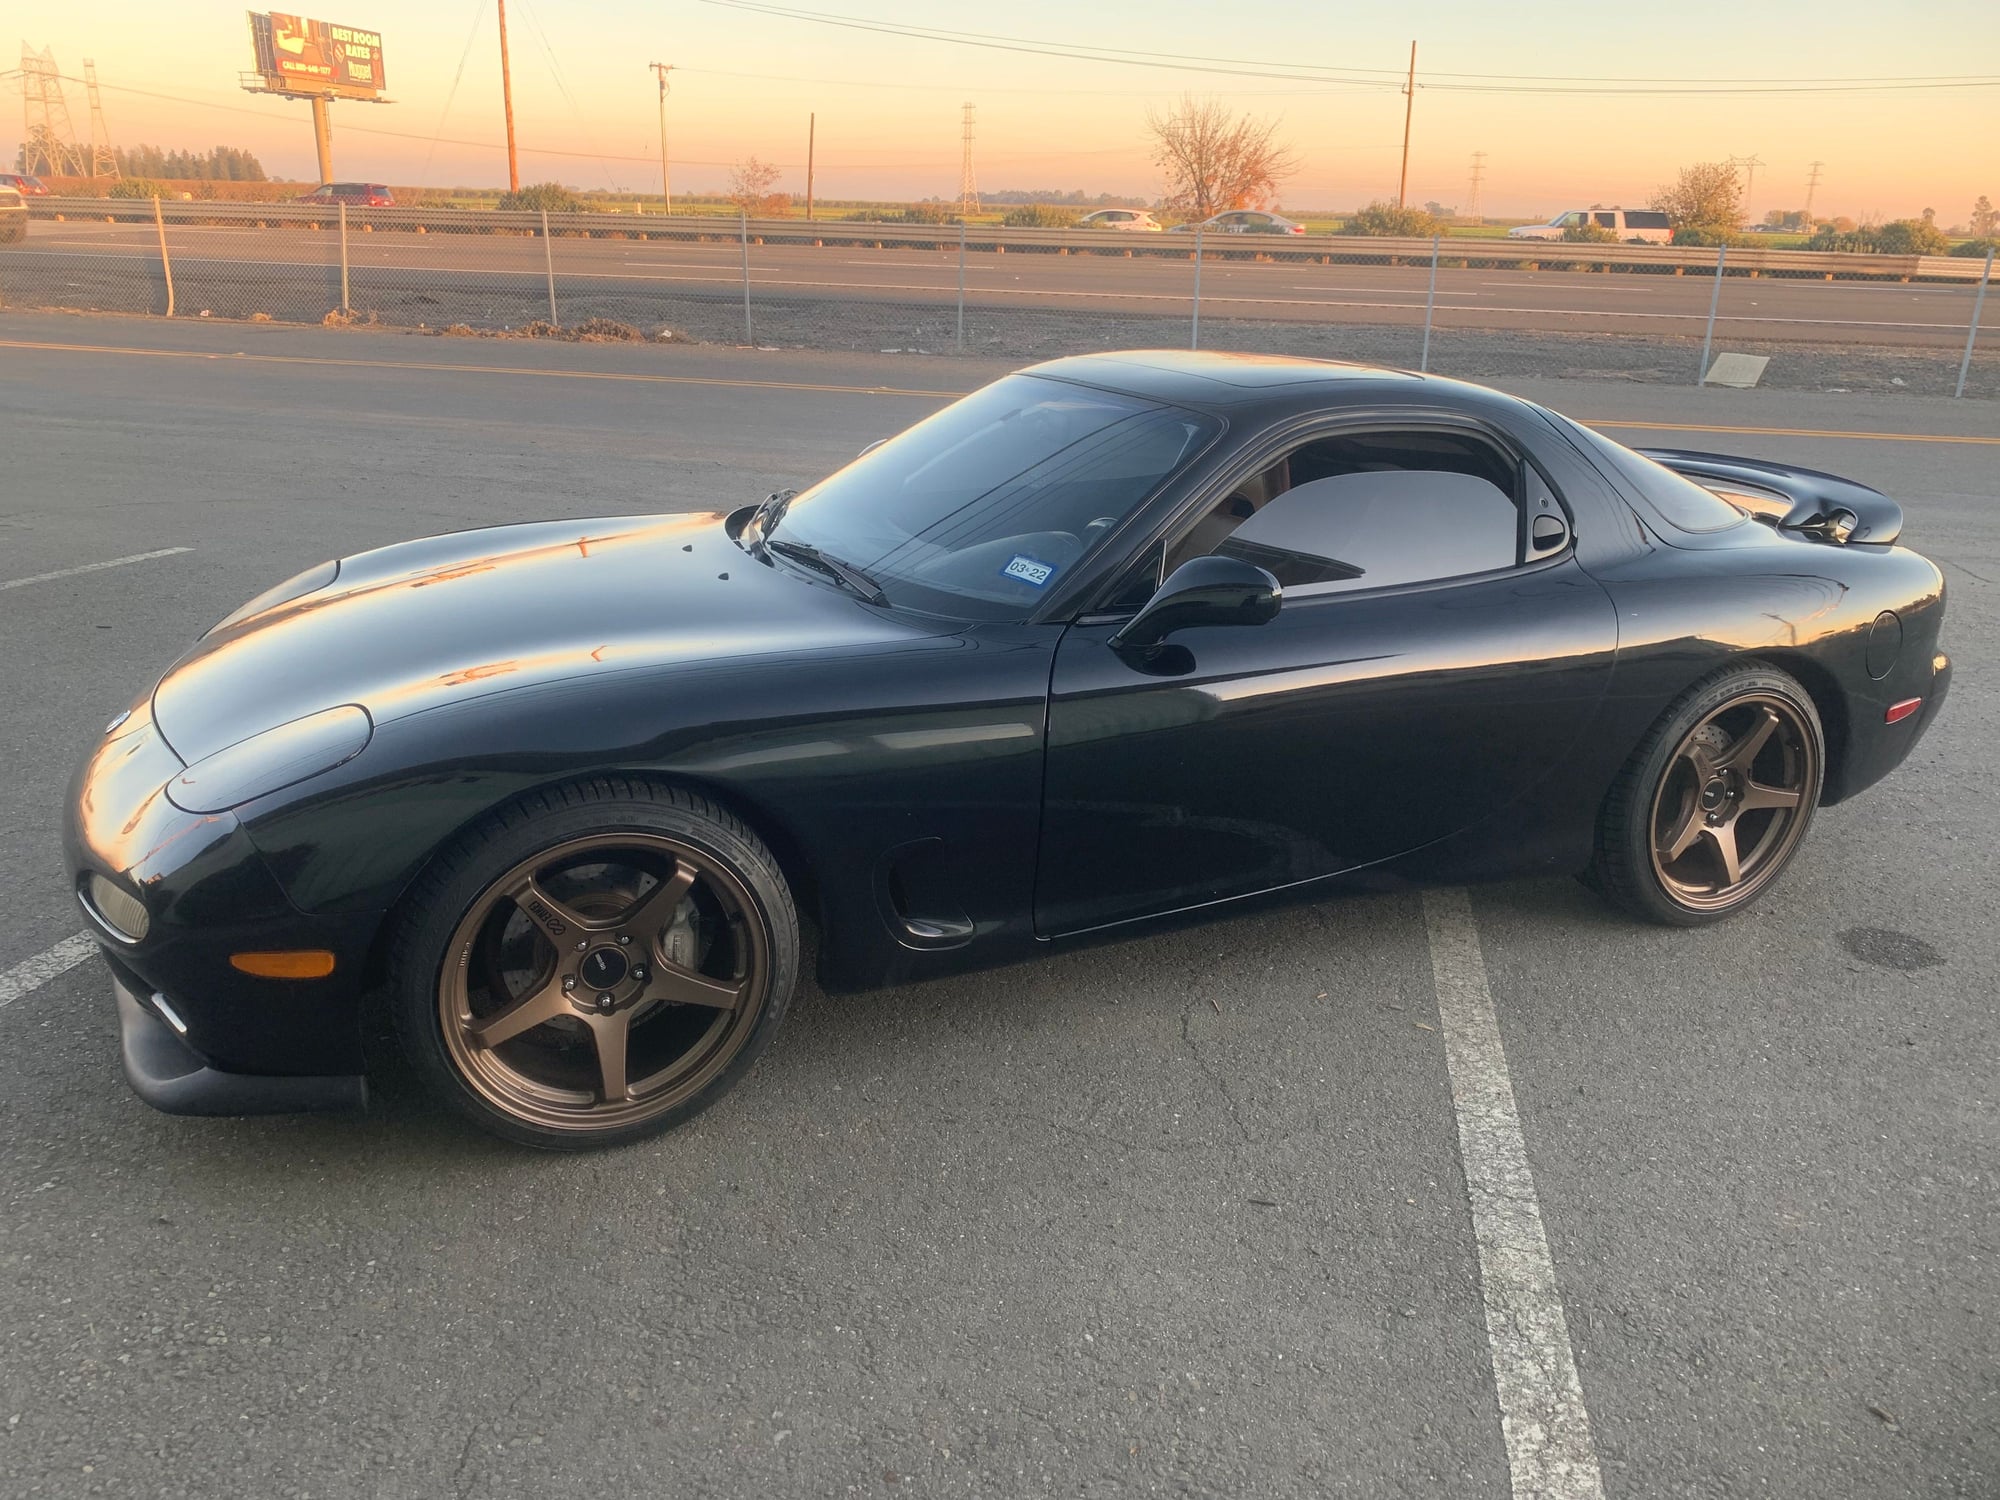 1995 Mazda RX-7 - 1995 FD RX-7 for sale - Used - VIN JM1FD3334S0400278 - 156,000 Miles - 2WD - Manual - Coupe - Black - Vacaville, CA 95688, United States